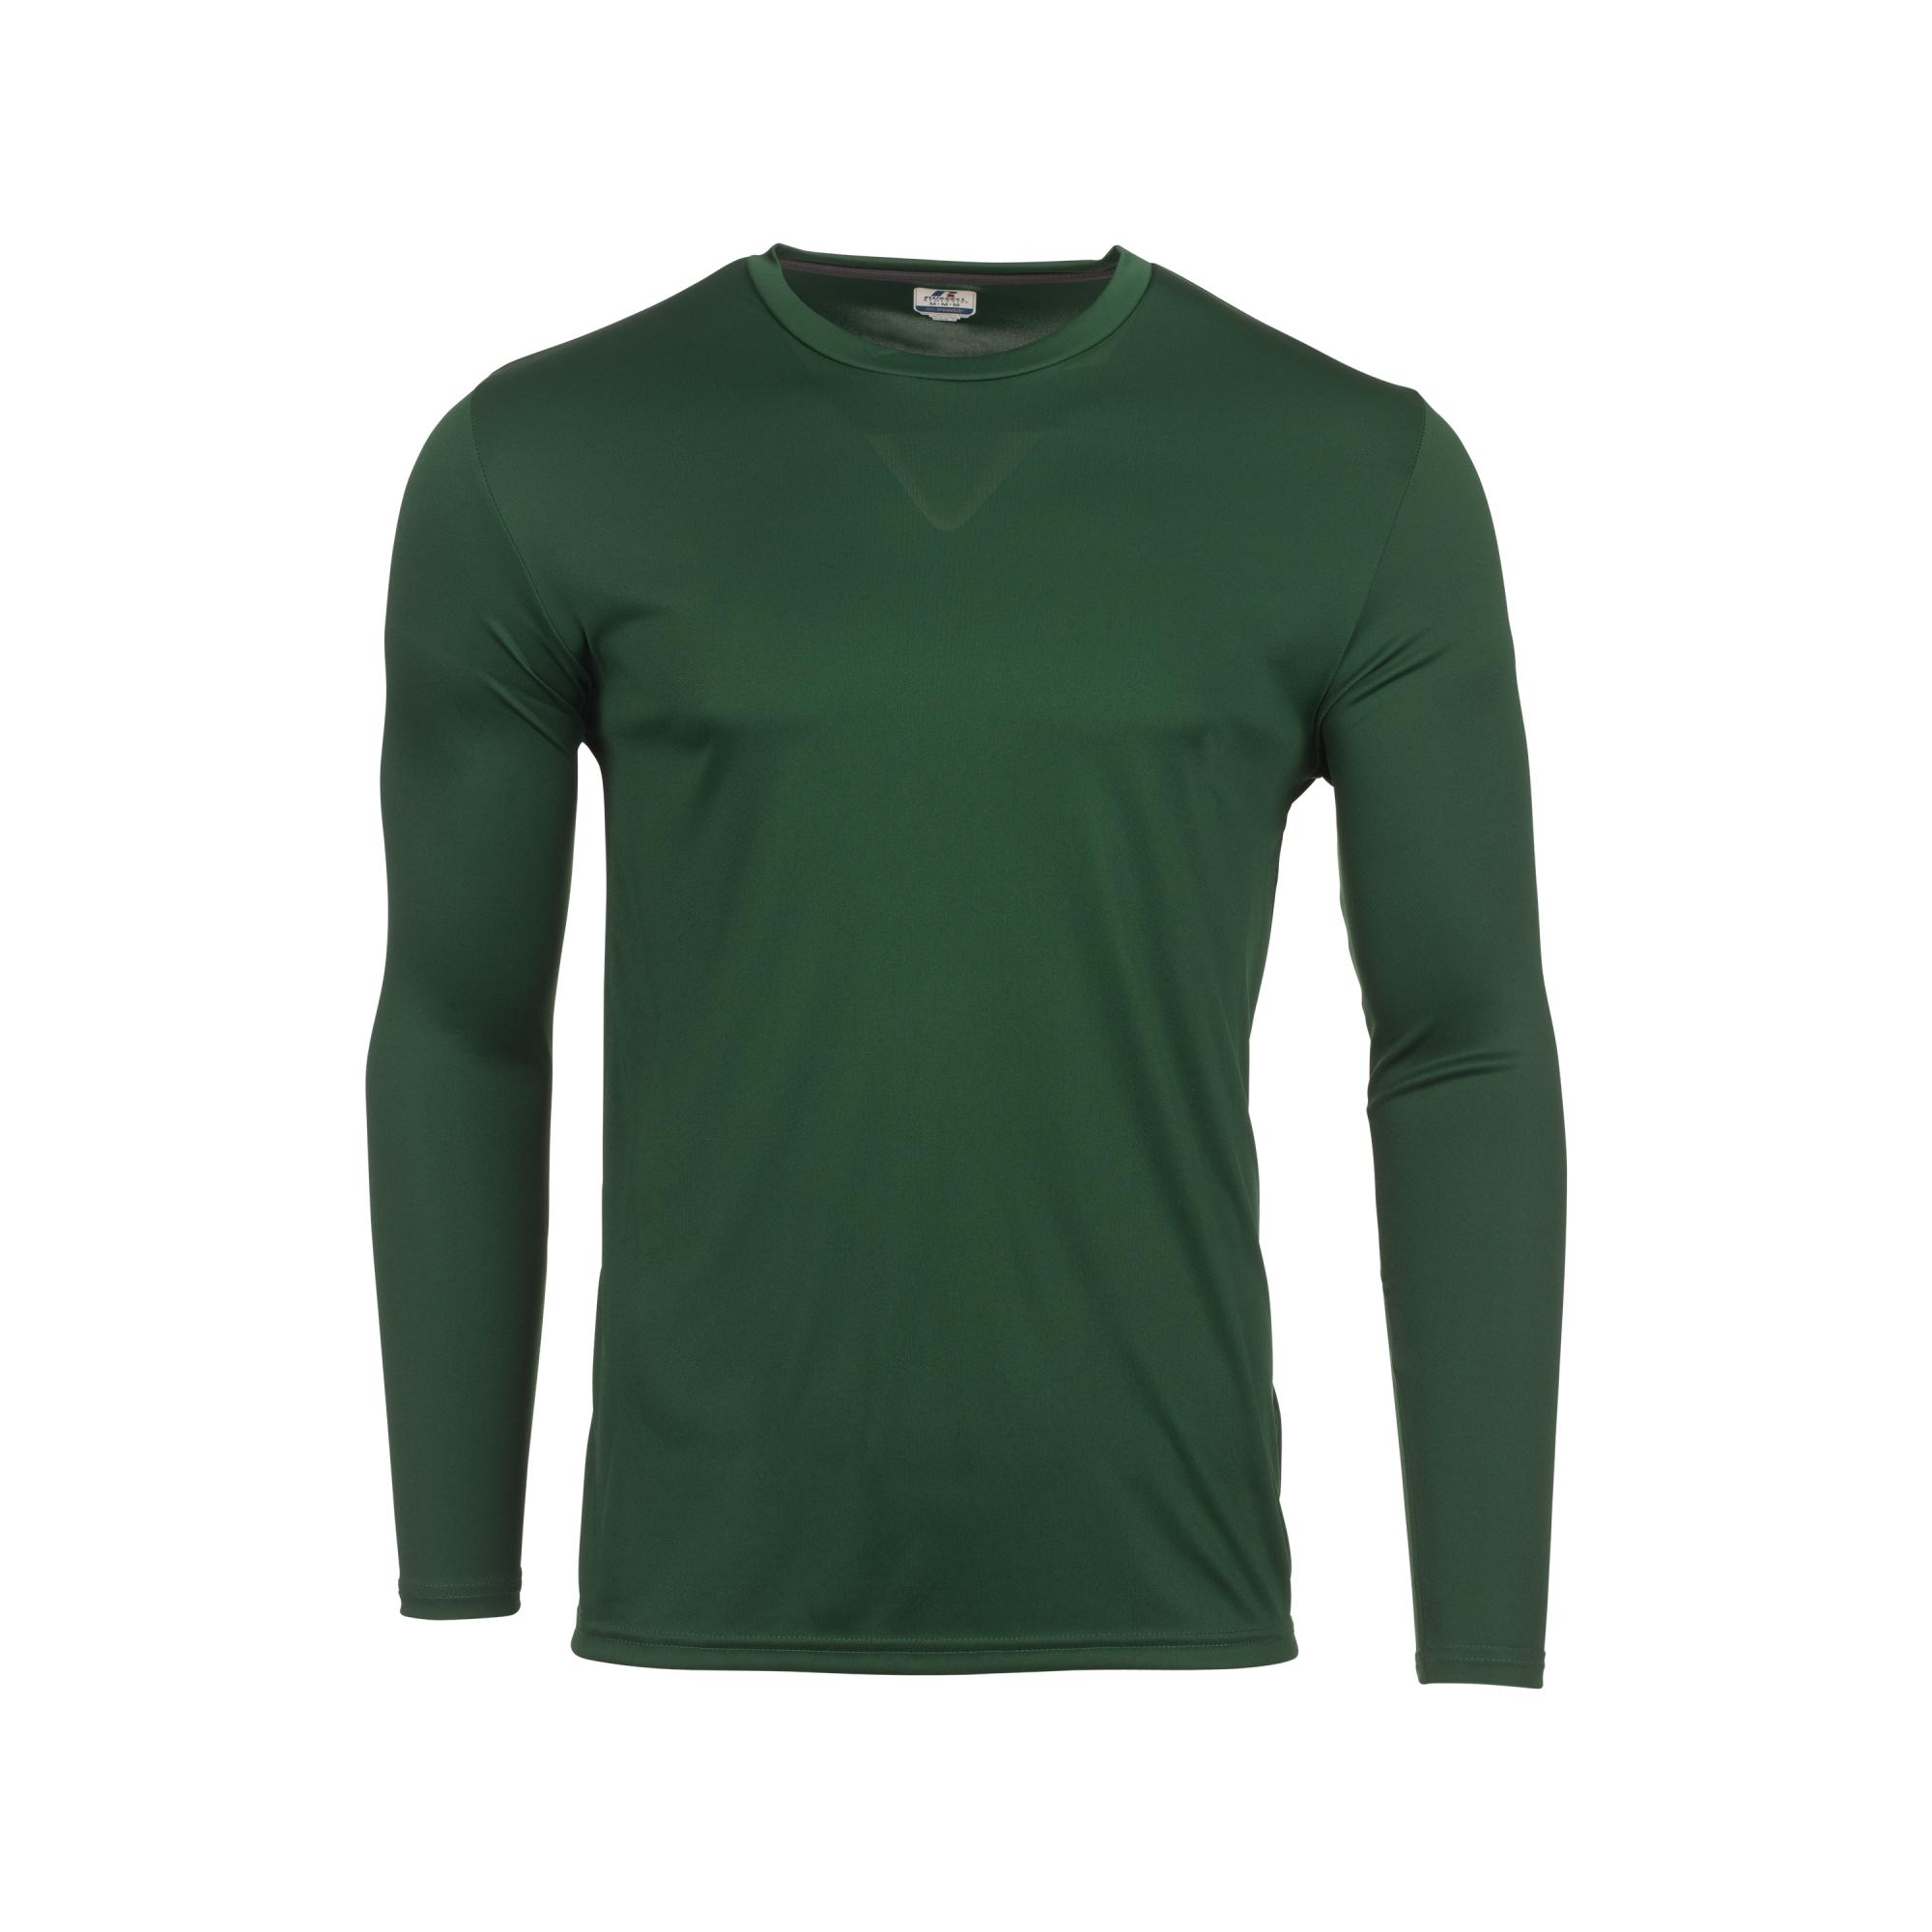 Russell Athletic Men's Shirt - Green - L